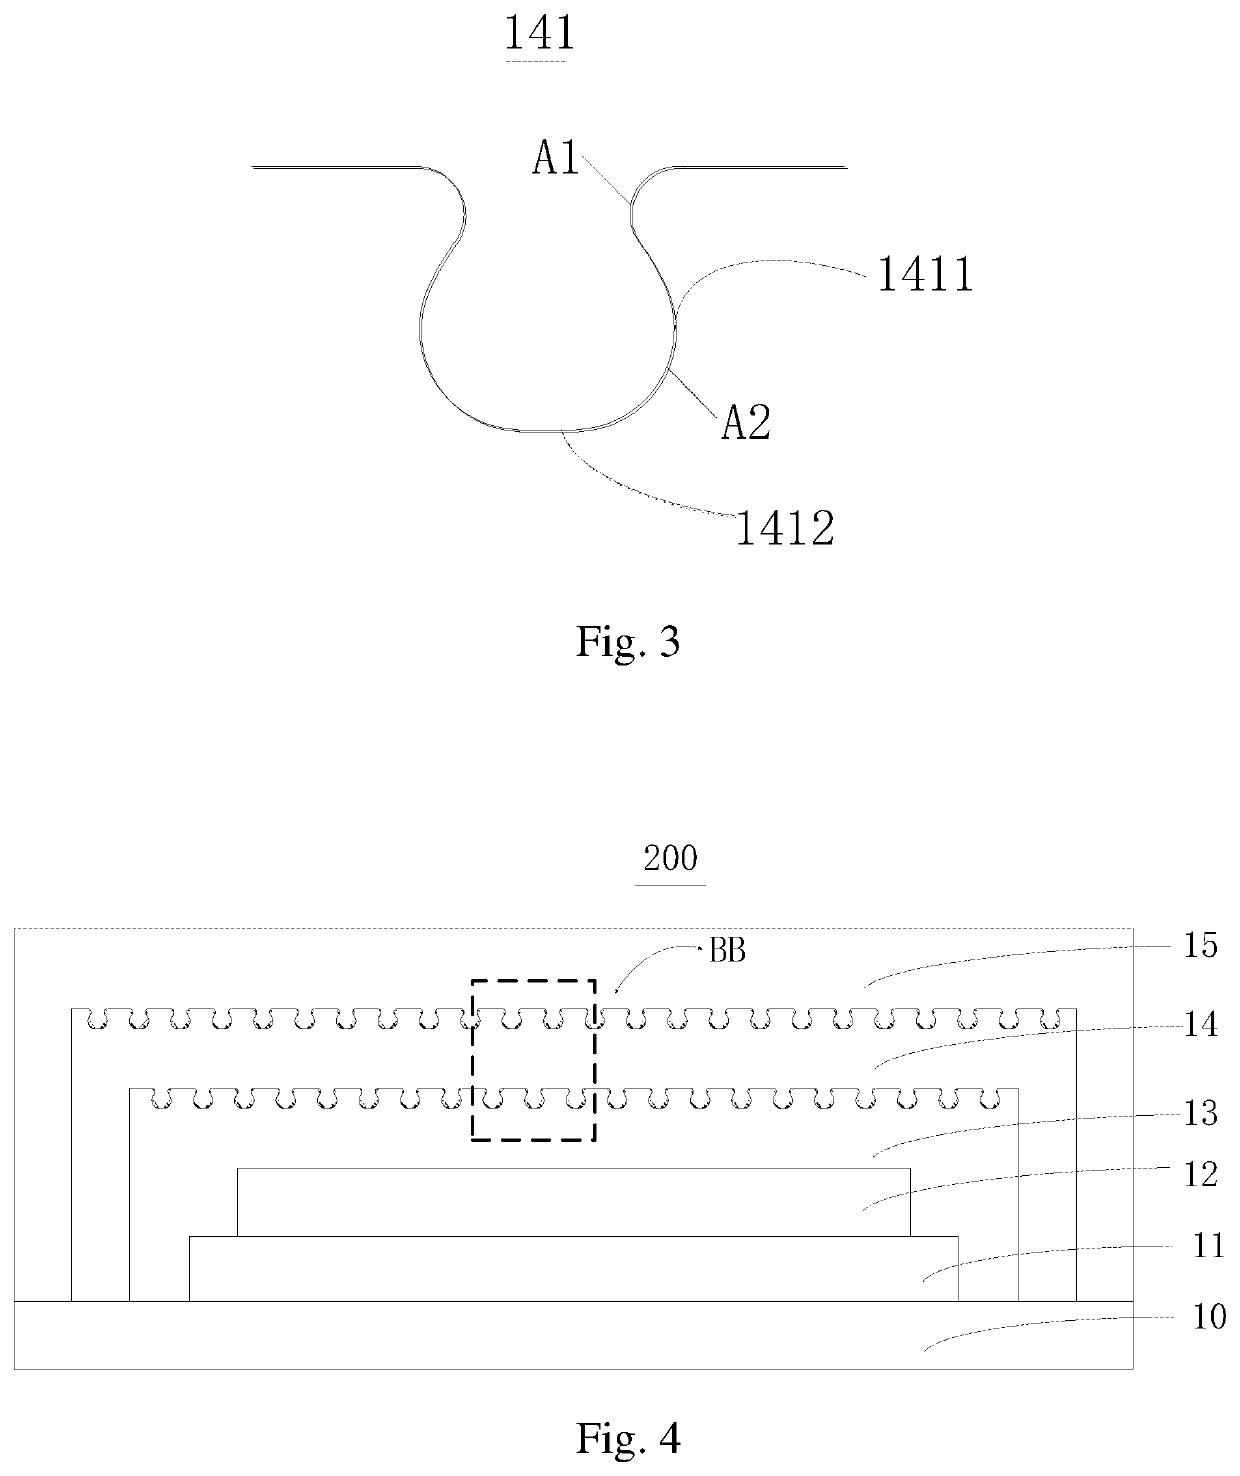 Display panel having thin film layers with recesses and protrusions